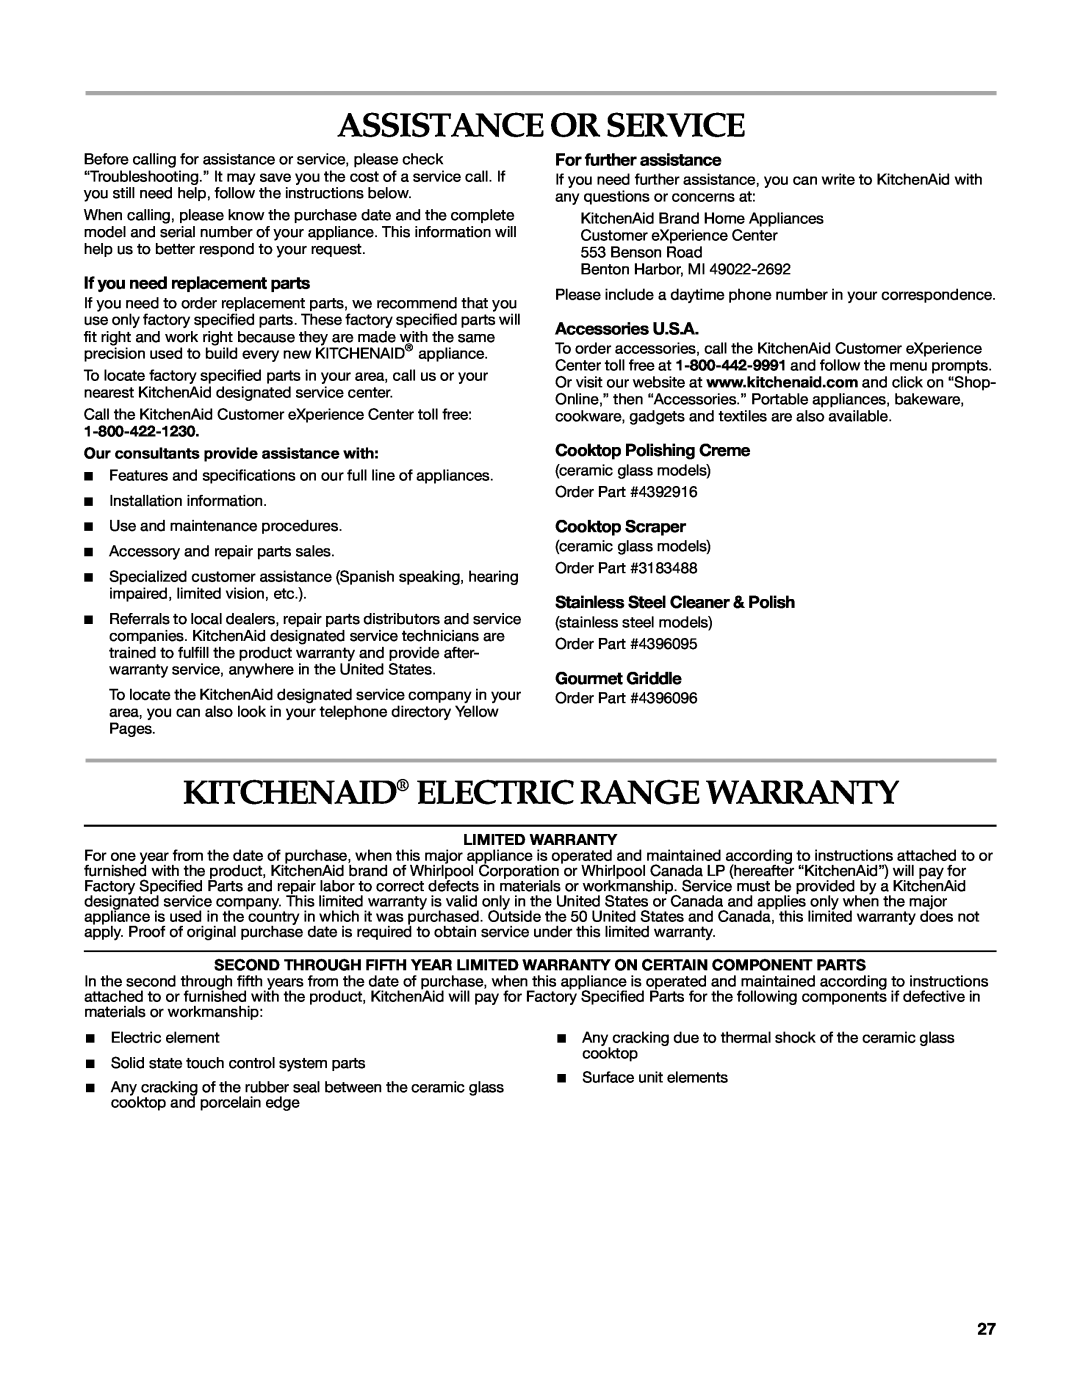 KitchenAid KERA205PBL warranty Our consultants provide assistance with, Limited Warranty, Assistance Or Service 